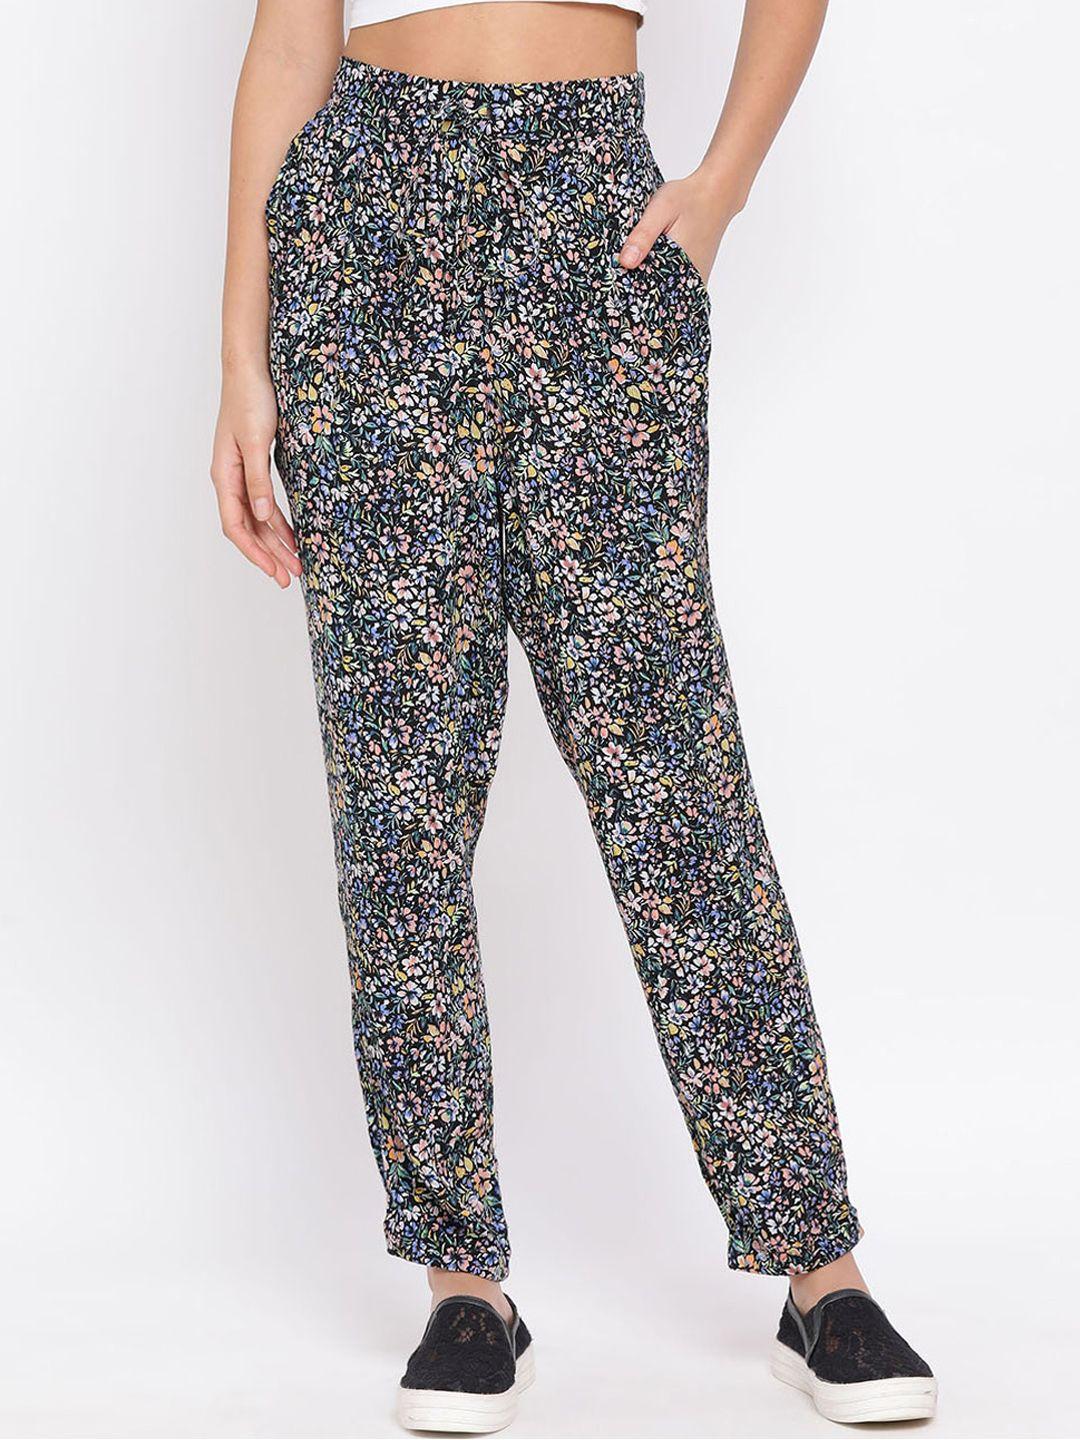 oxolloxo-women-multicoloured-floral-printed-regular-trousers